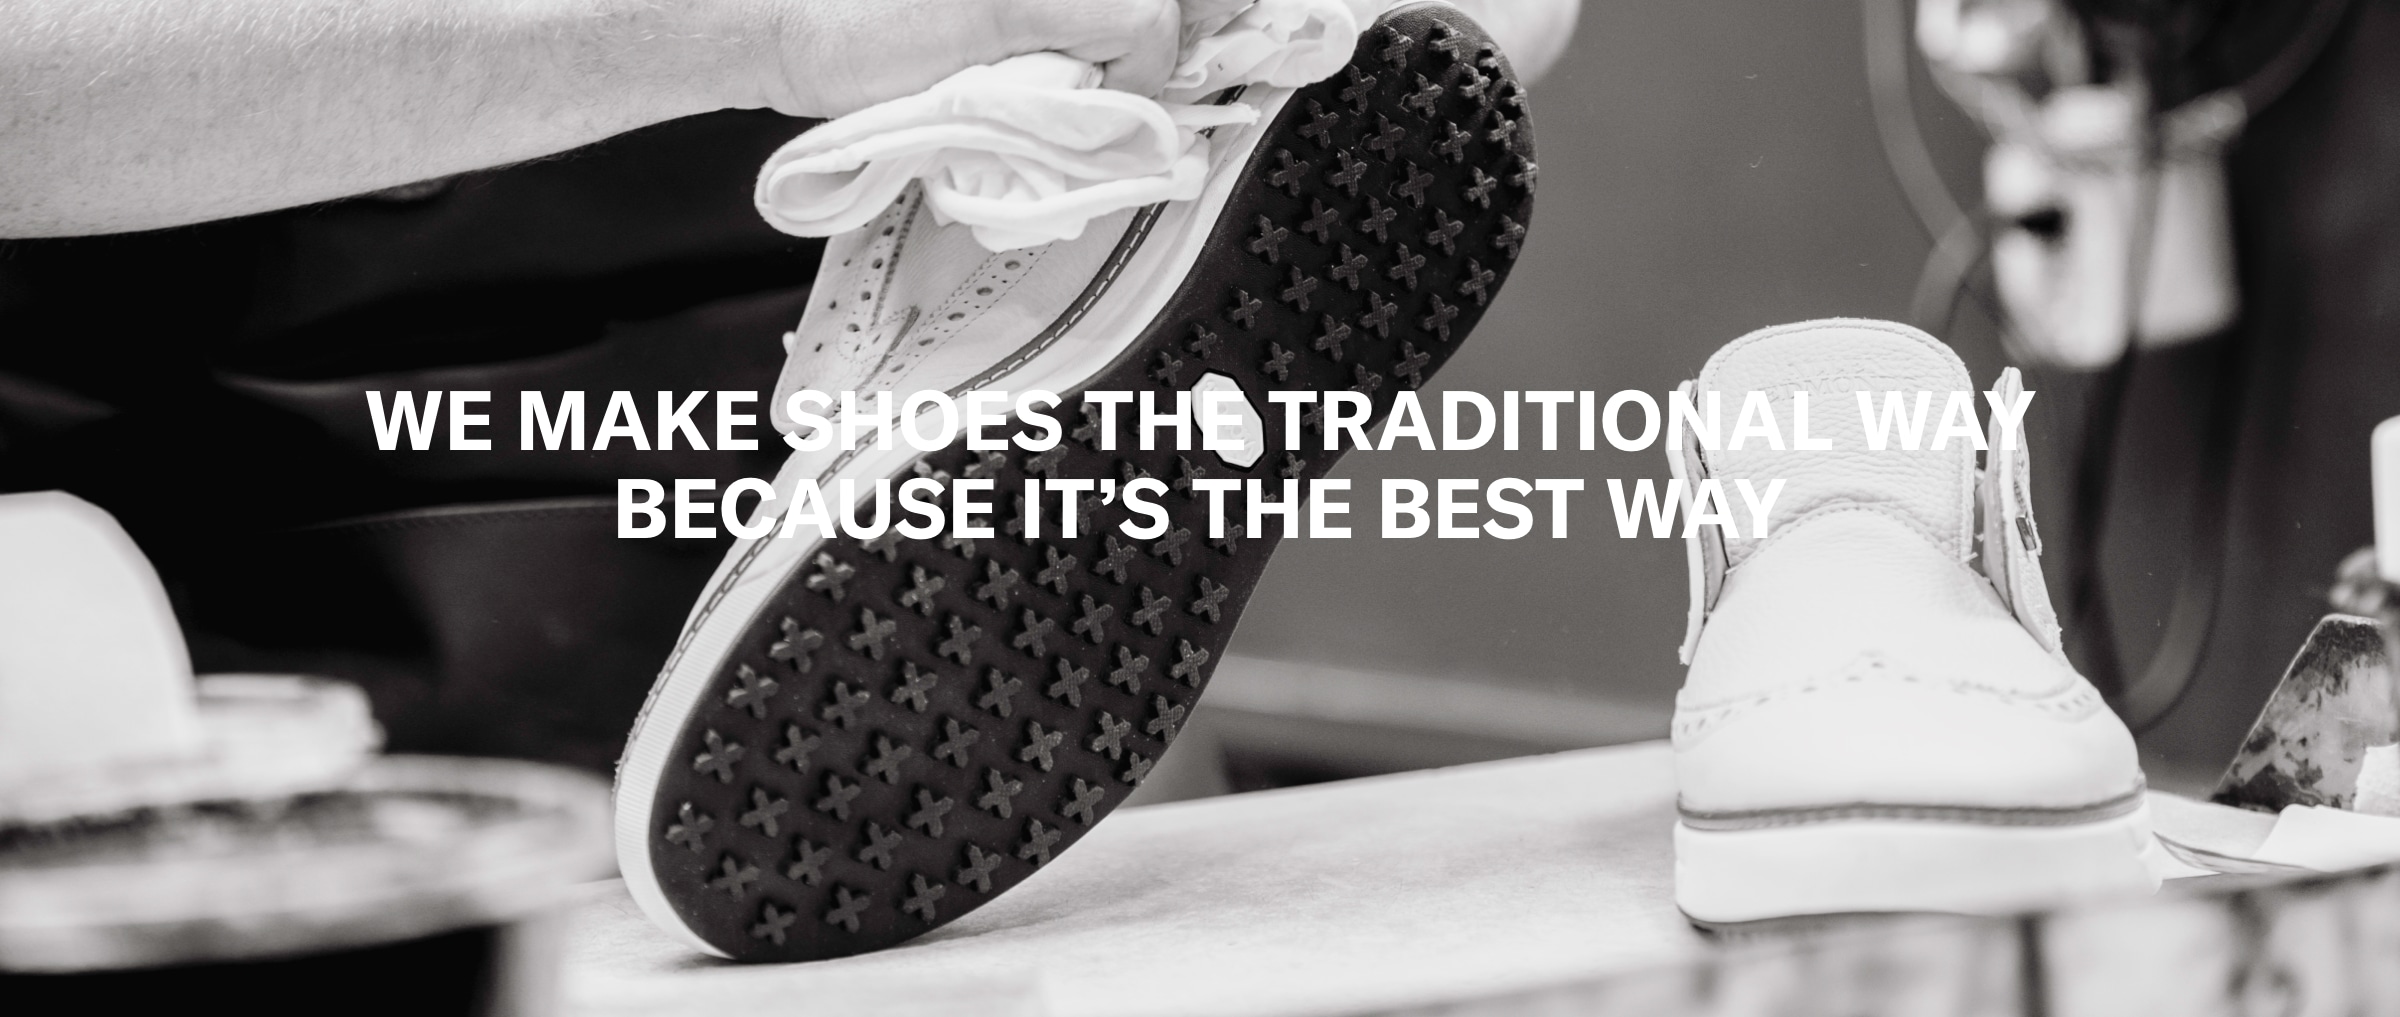 We Make Shoes the Traditional Way Because It’s the Best Way